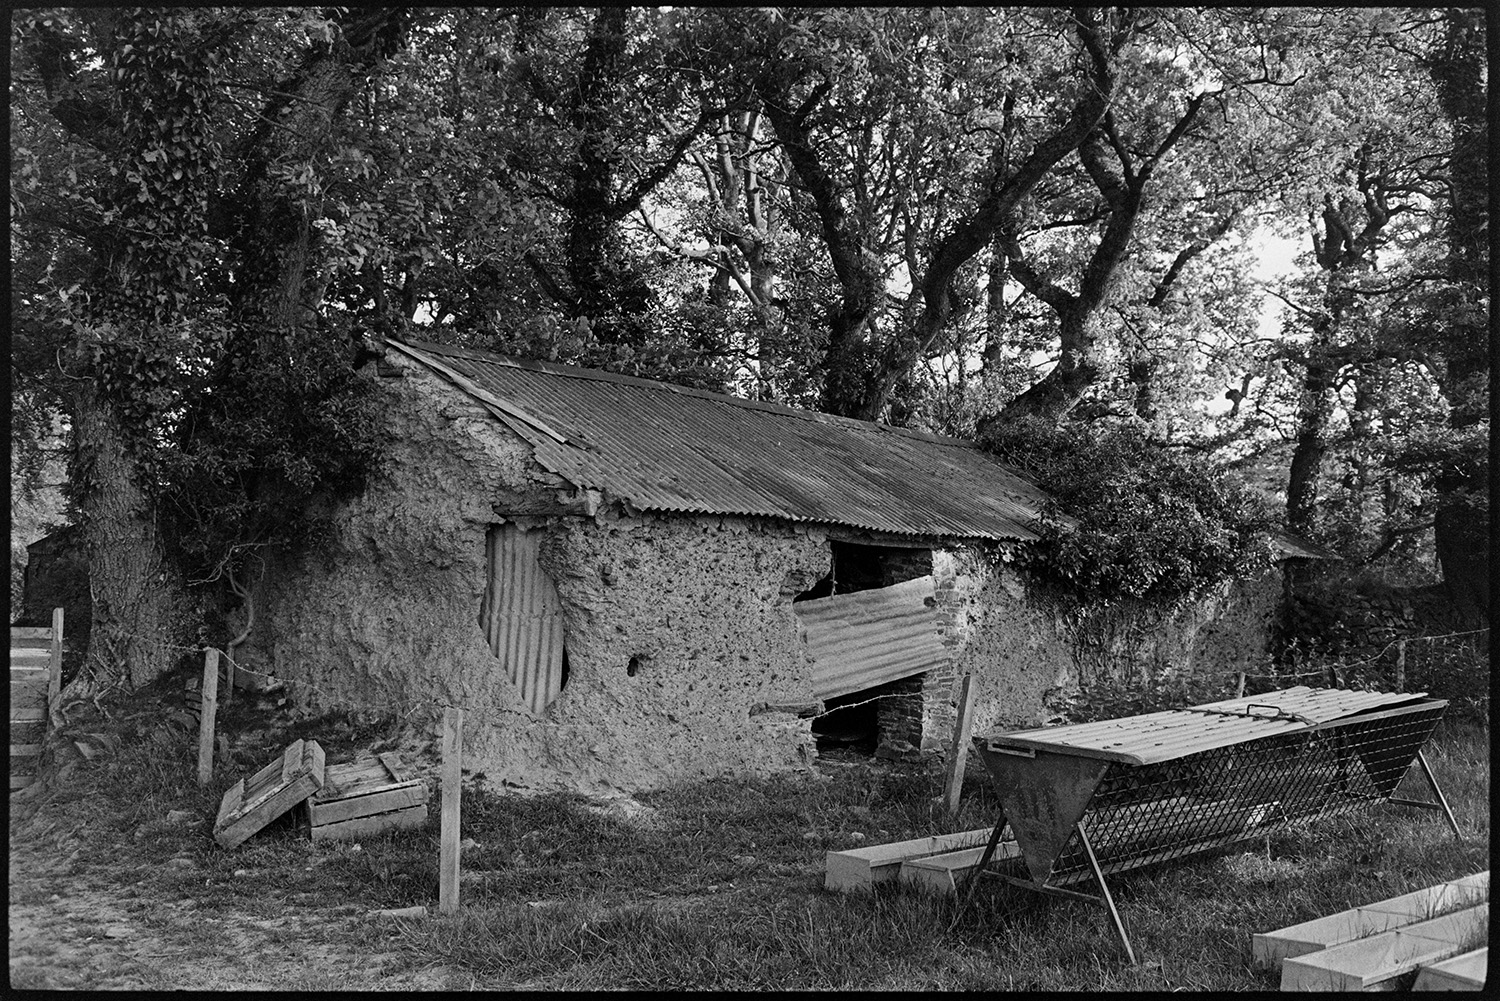 Old cob barn crumbling. 
[A collapsing cob barn with a corrugated iron roof, surrounded by trees. A hay rack is on the grass in front of the barn.]